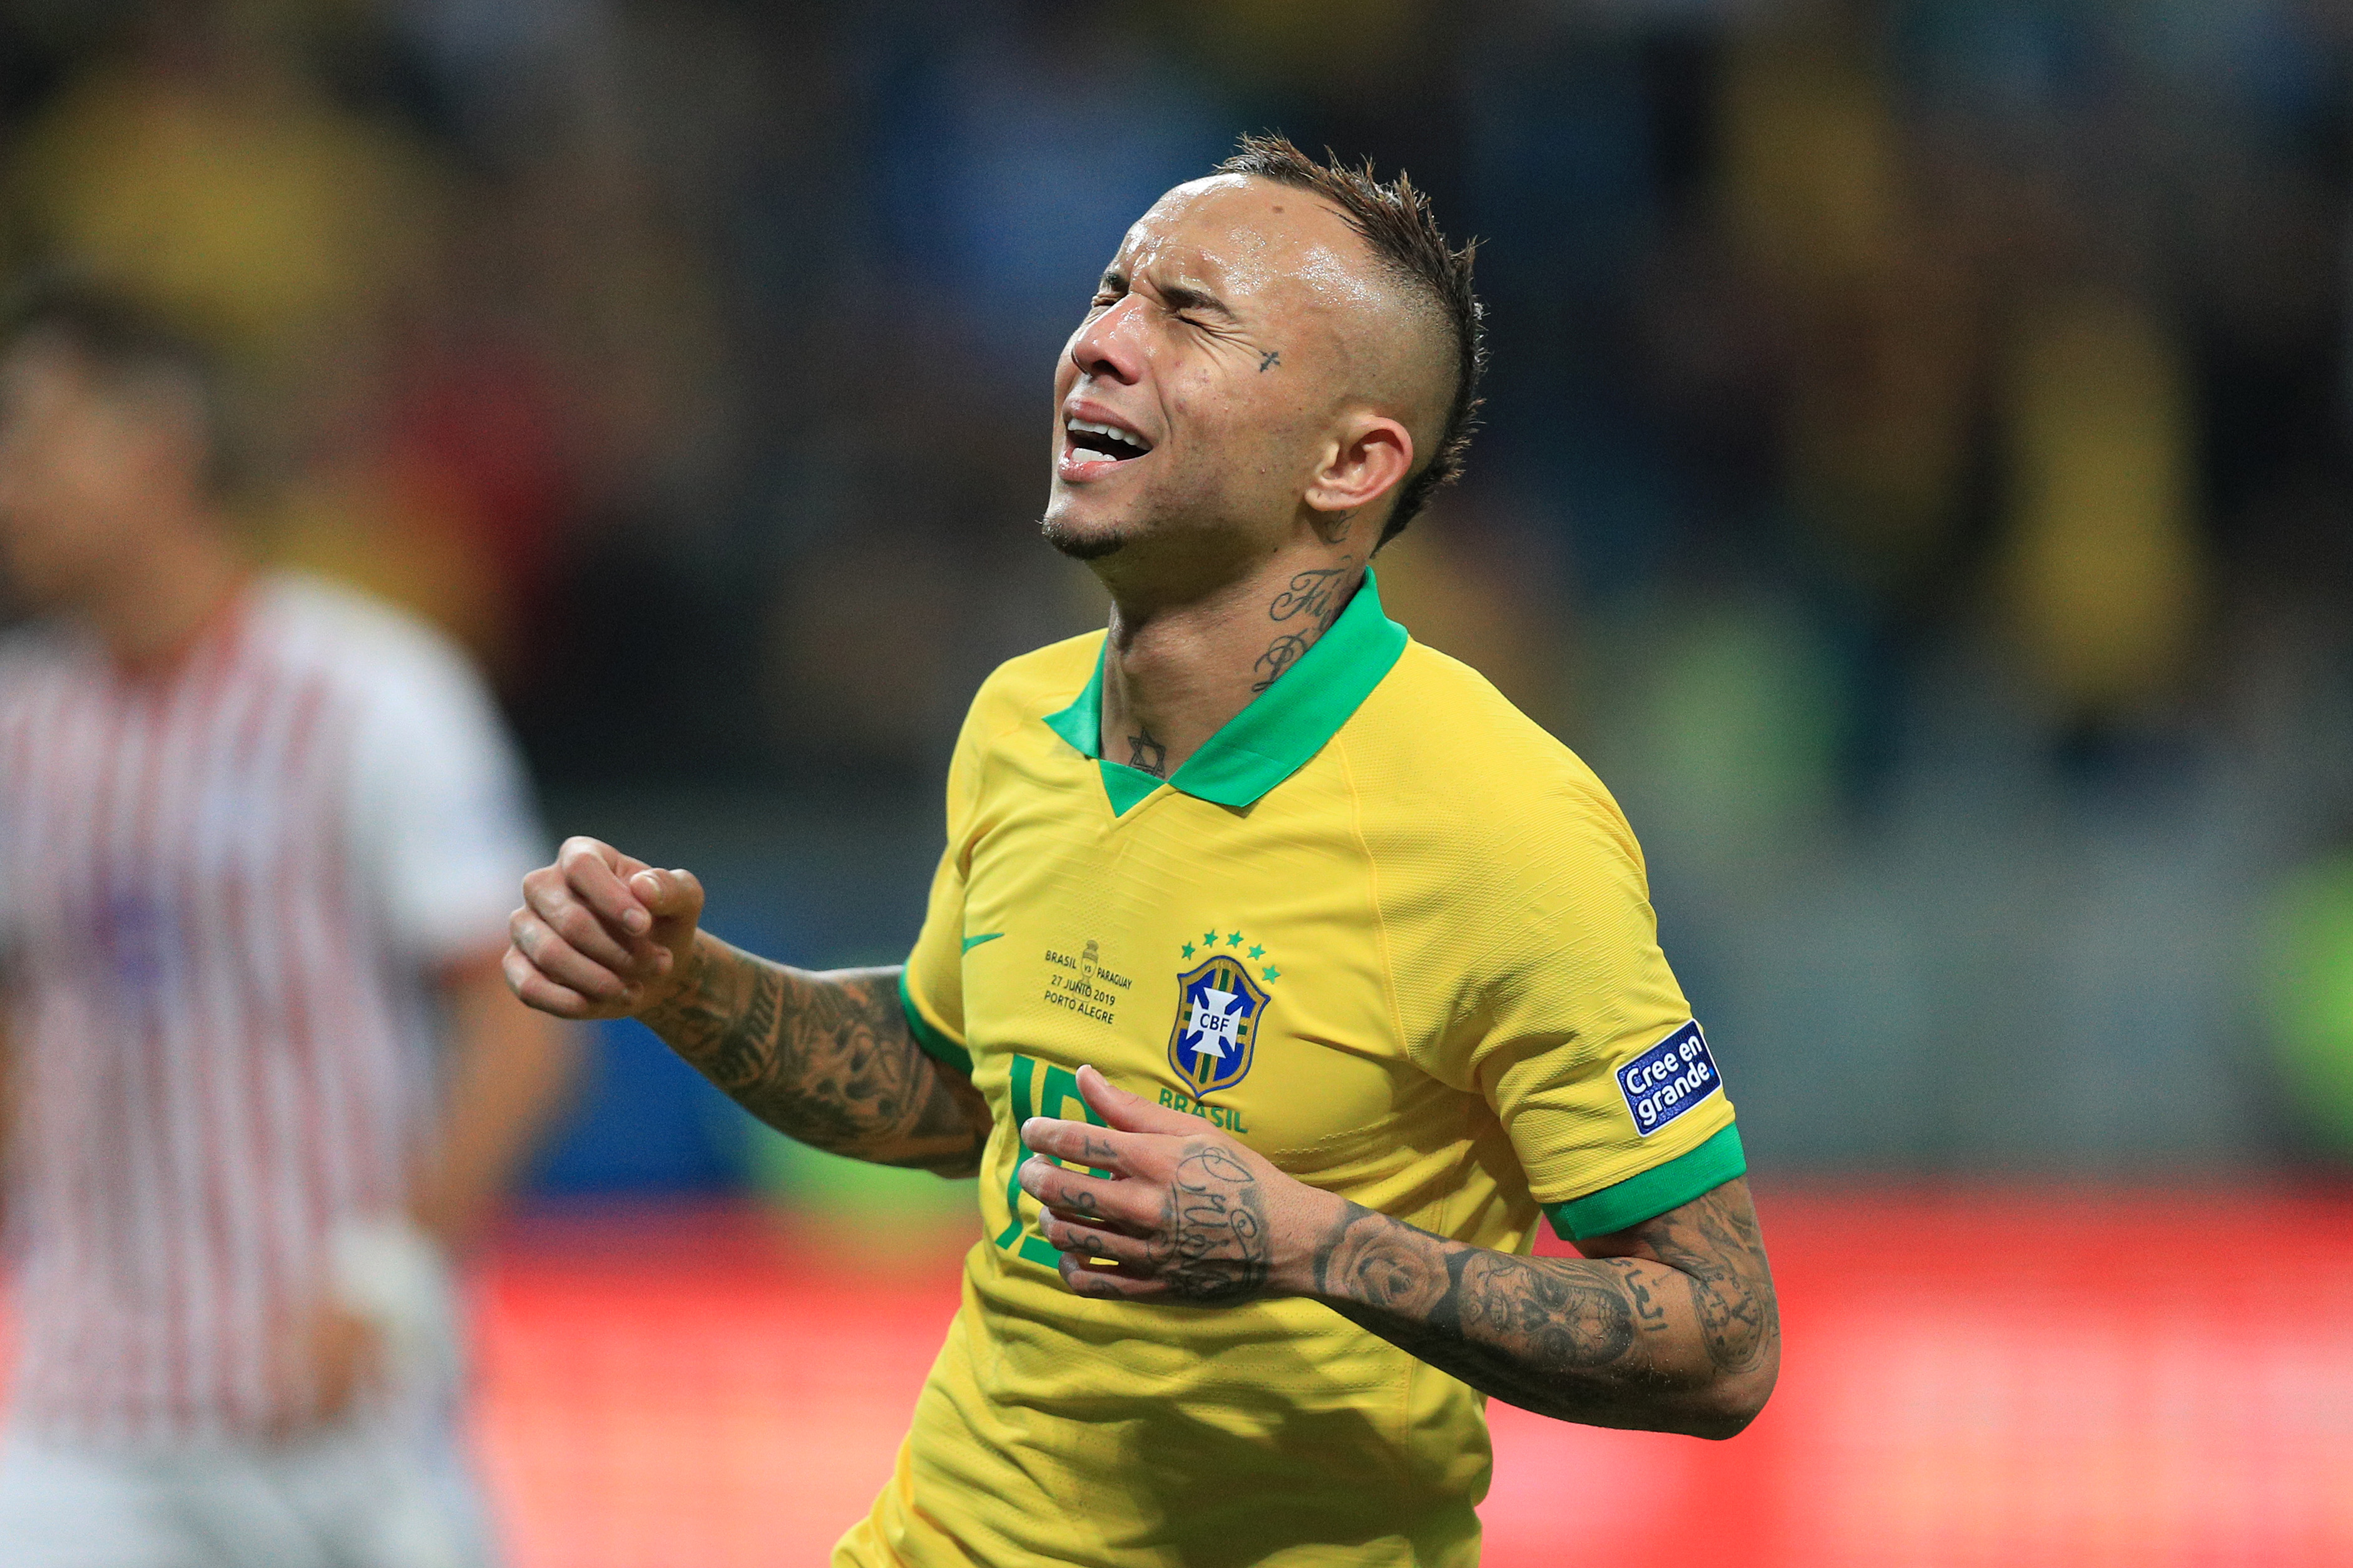 Everton Soares is linked with a move to Arsenal. (Photo courtesy: AFP/Getty)